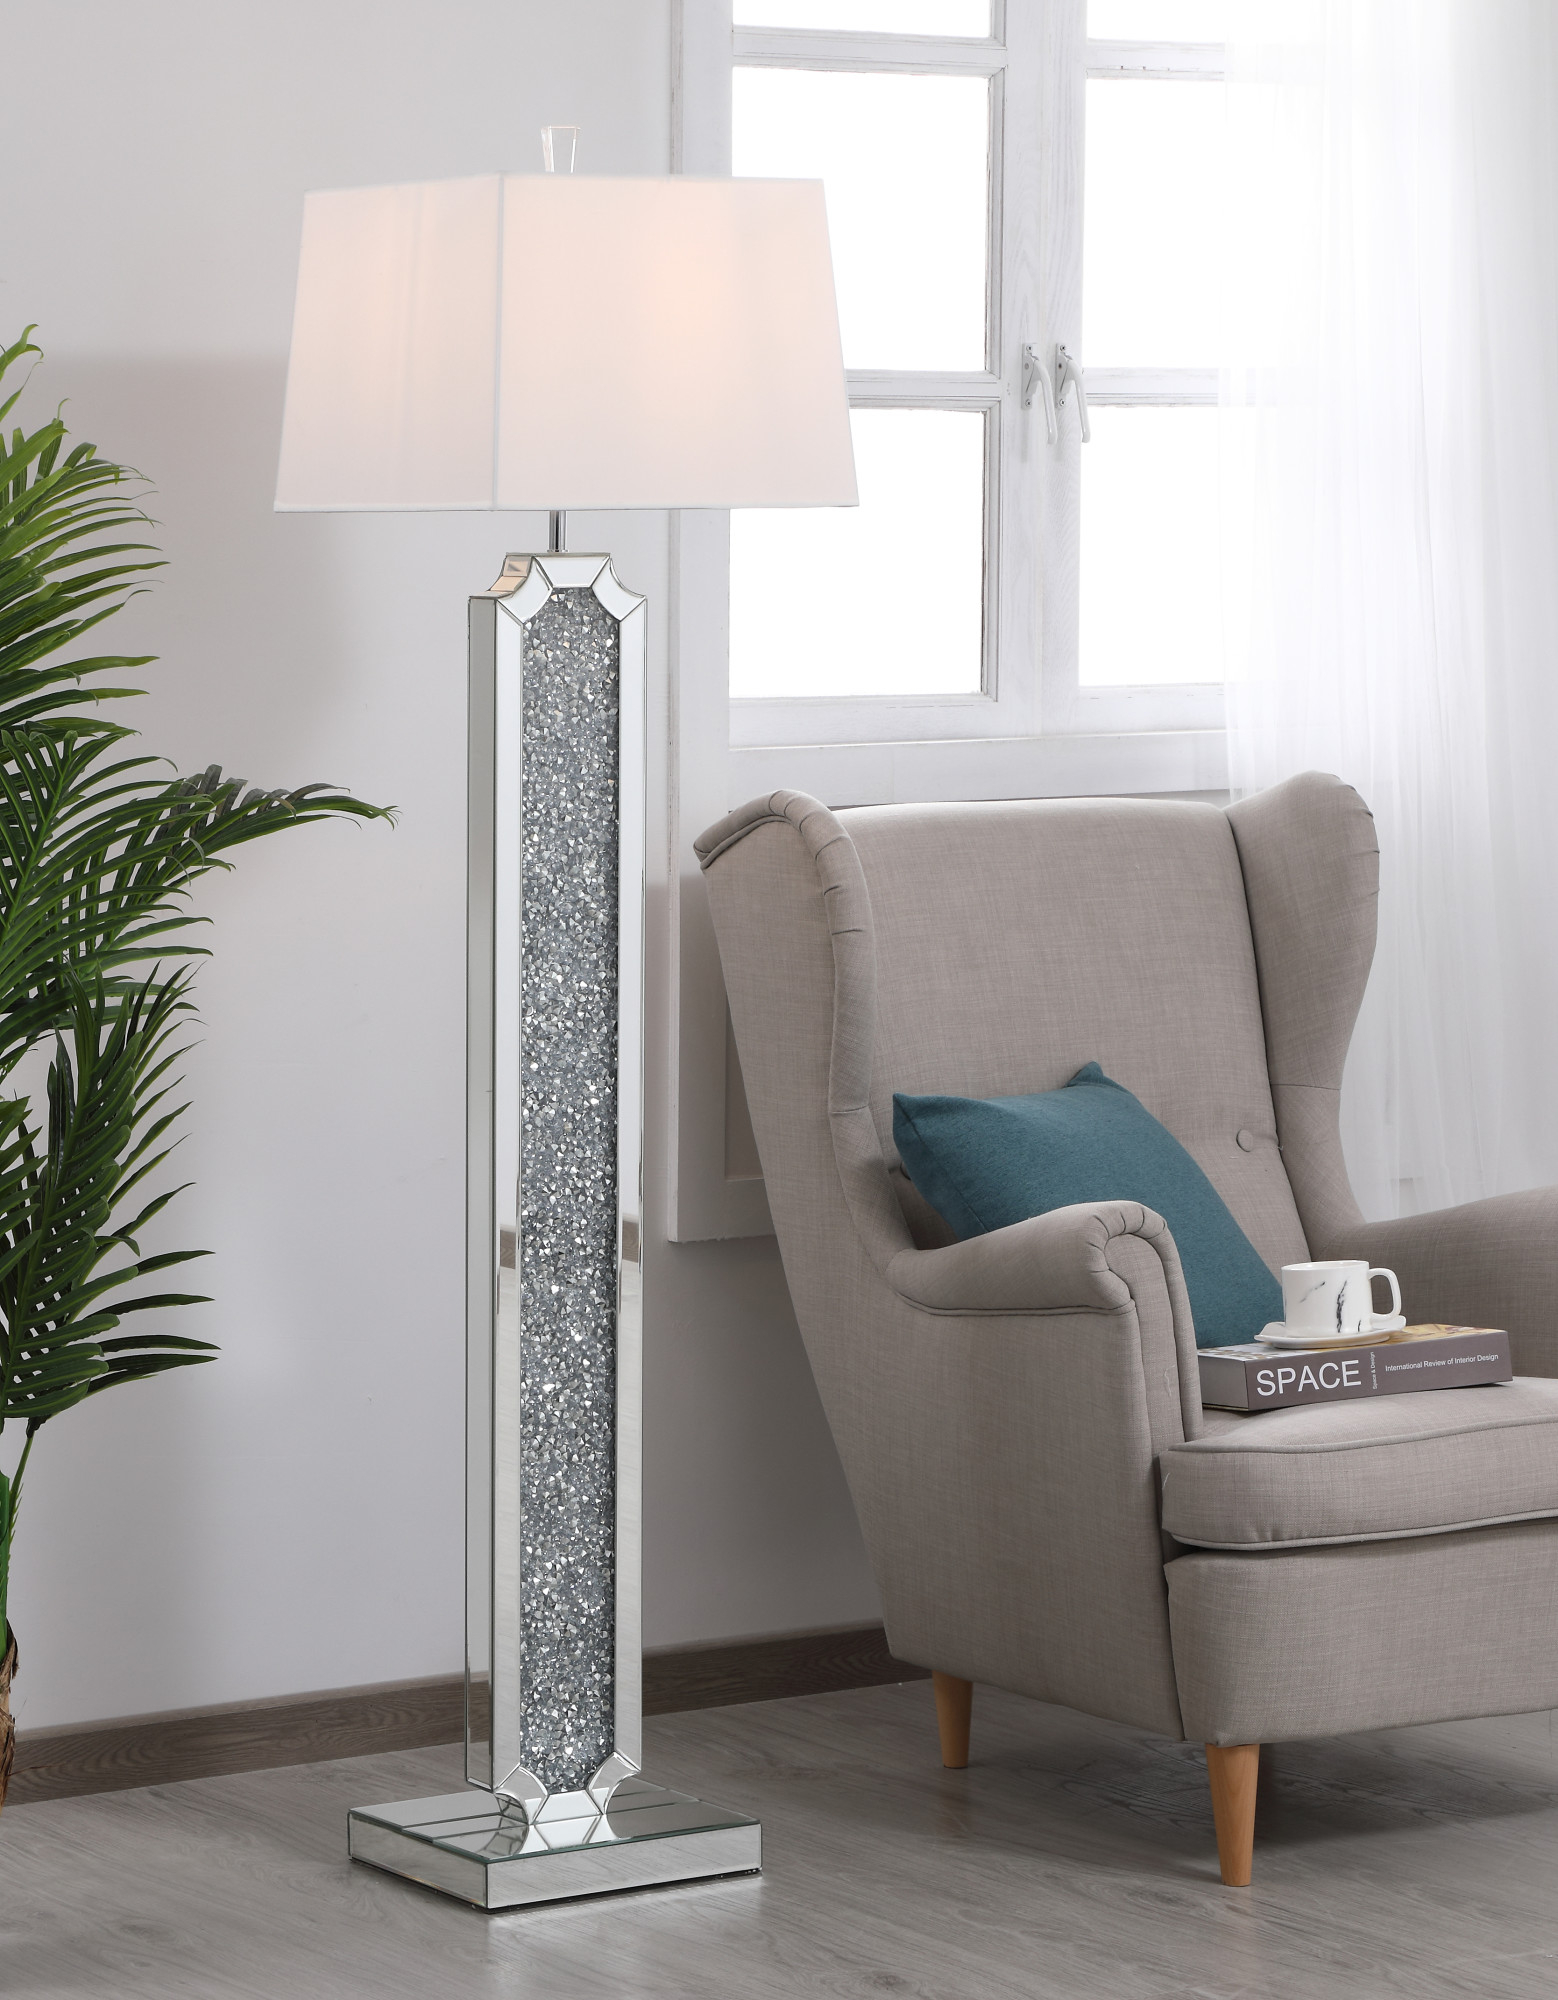 Details About Mirrored Floor Lamp Crystals White Shade Modern Living Room Bedroom 1 Light 62 regarding sizing 1558 X 2000